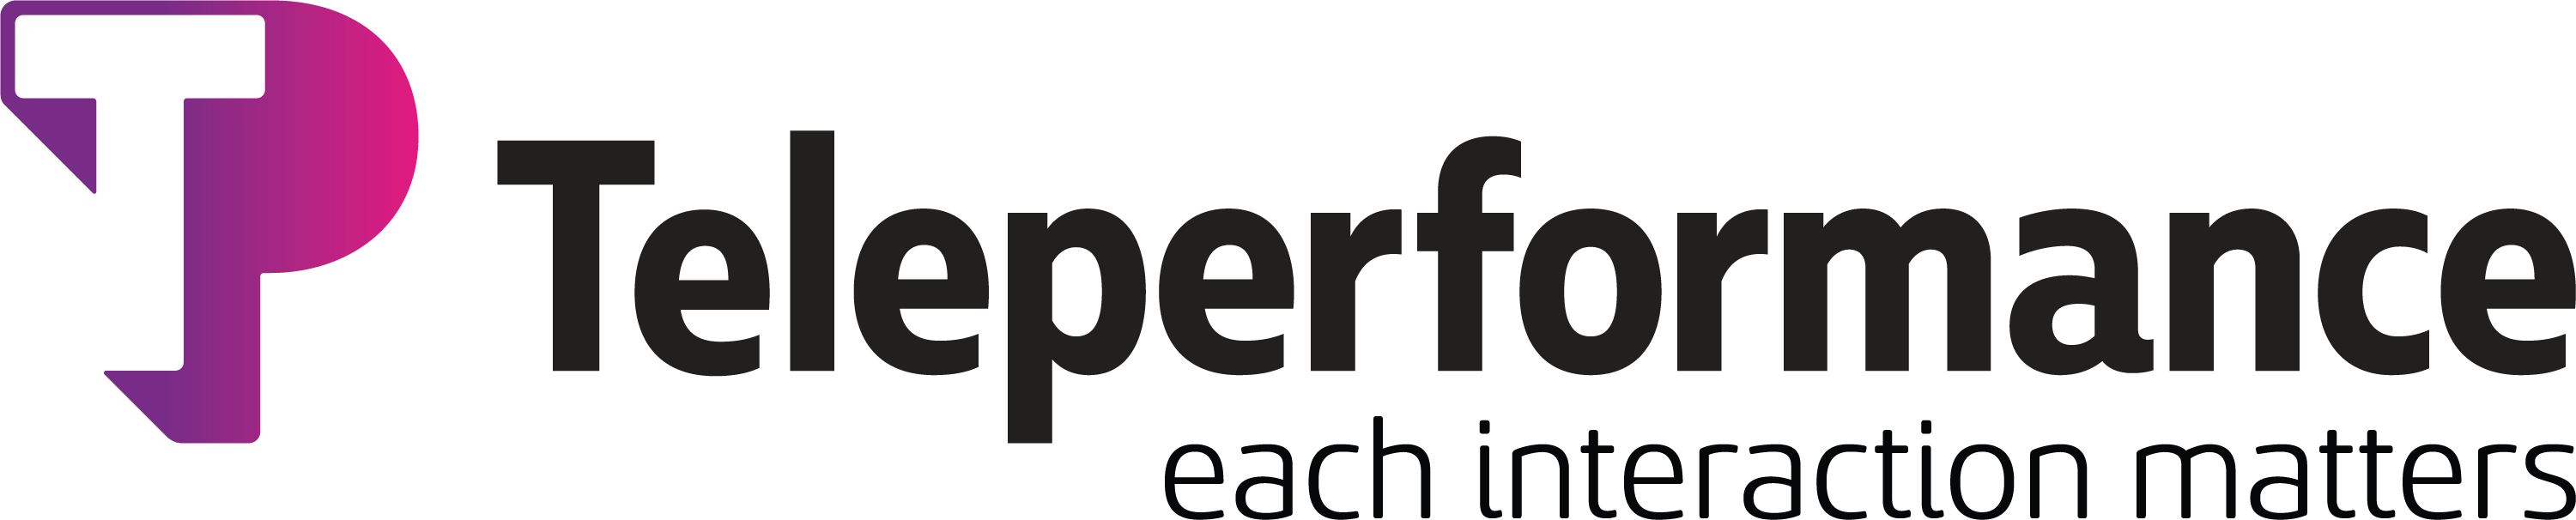 teleperformance logo with tagline "each interaction matters"